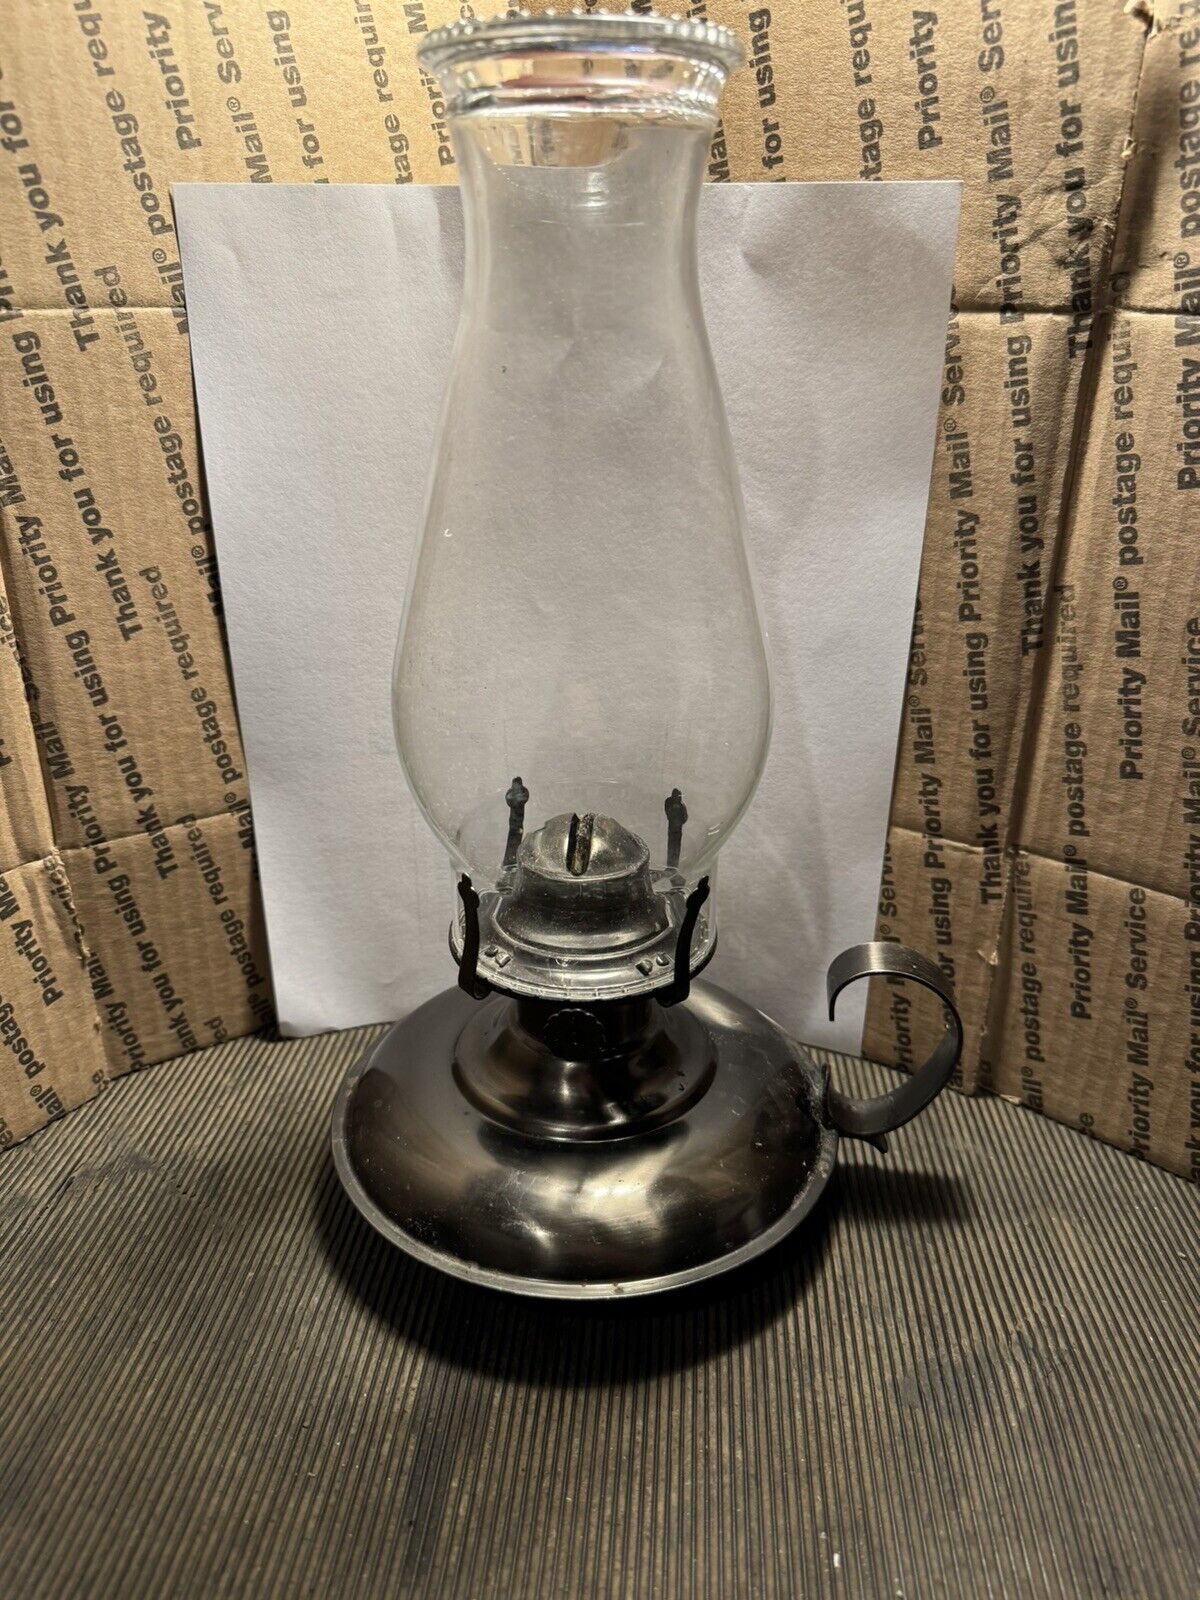 Enesco Silver Plated Oil Lamp